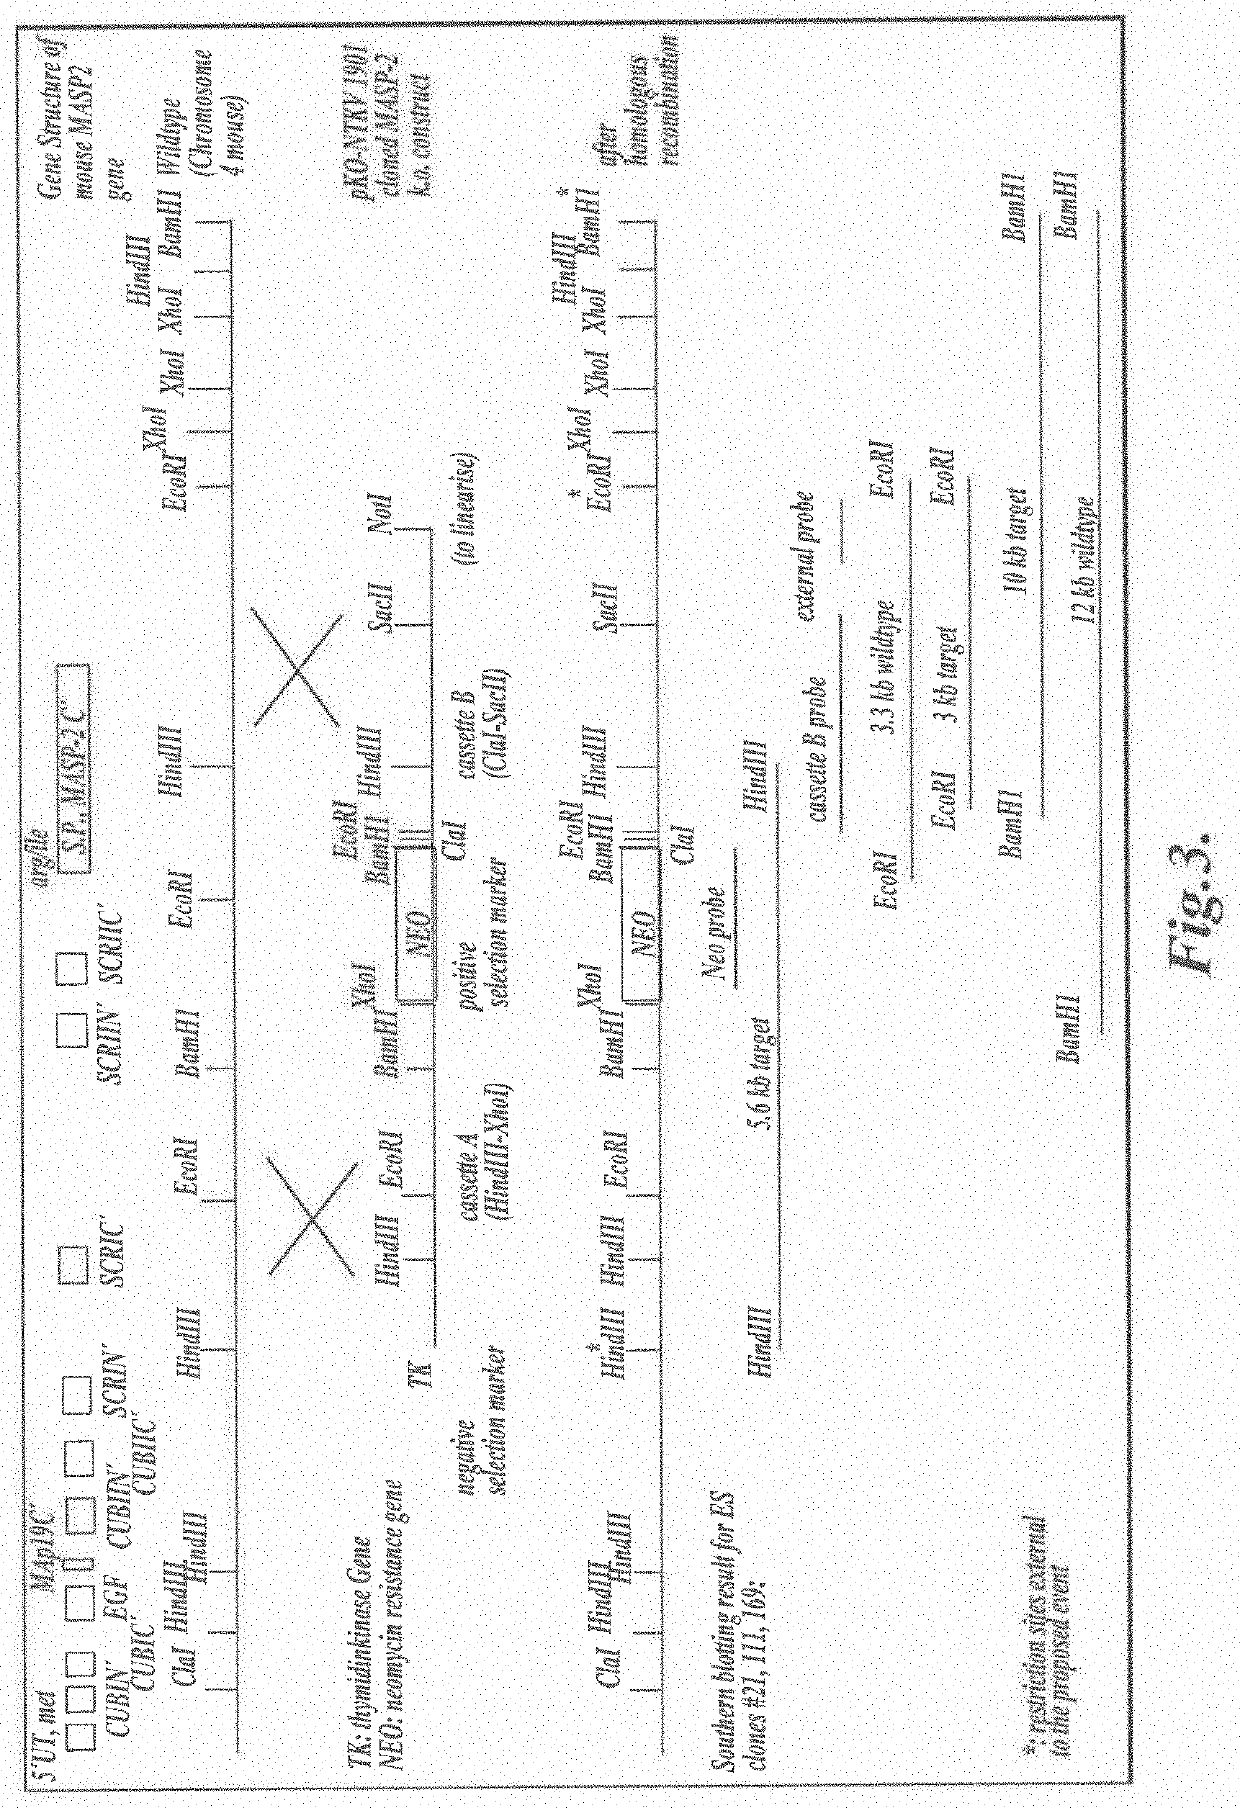 Methods for treating and/or preventing  idiopathic pneumonia syndrome (IPS) and/or capillary leak syndrome (CLS) and/or engraftment syndrome (ES) and/or fluid overload (FO) associated with hematopoietic stem cell transplant